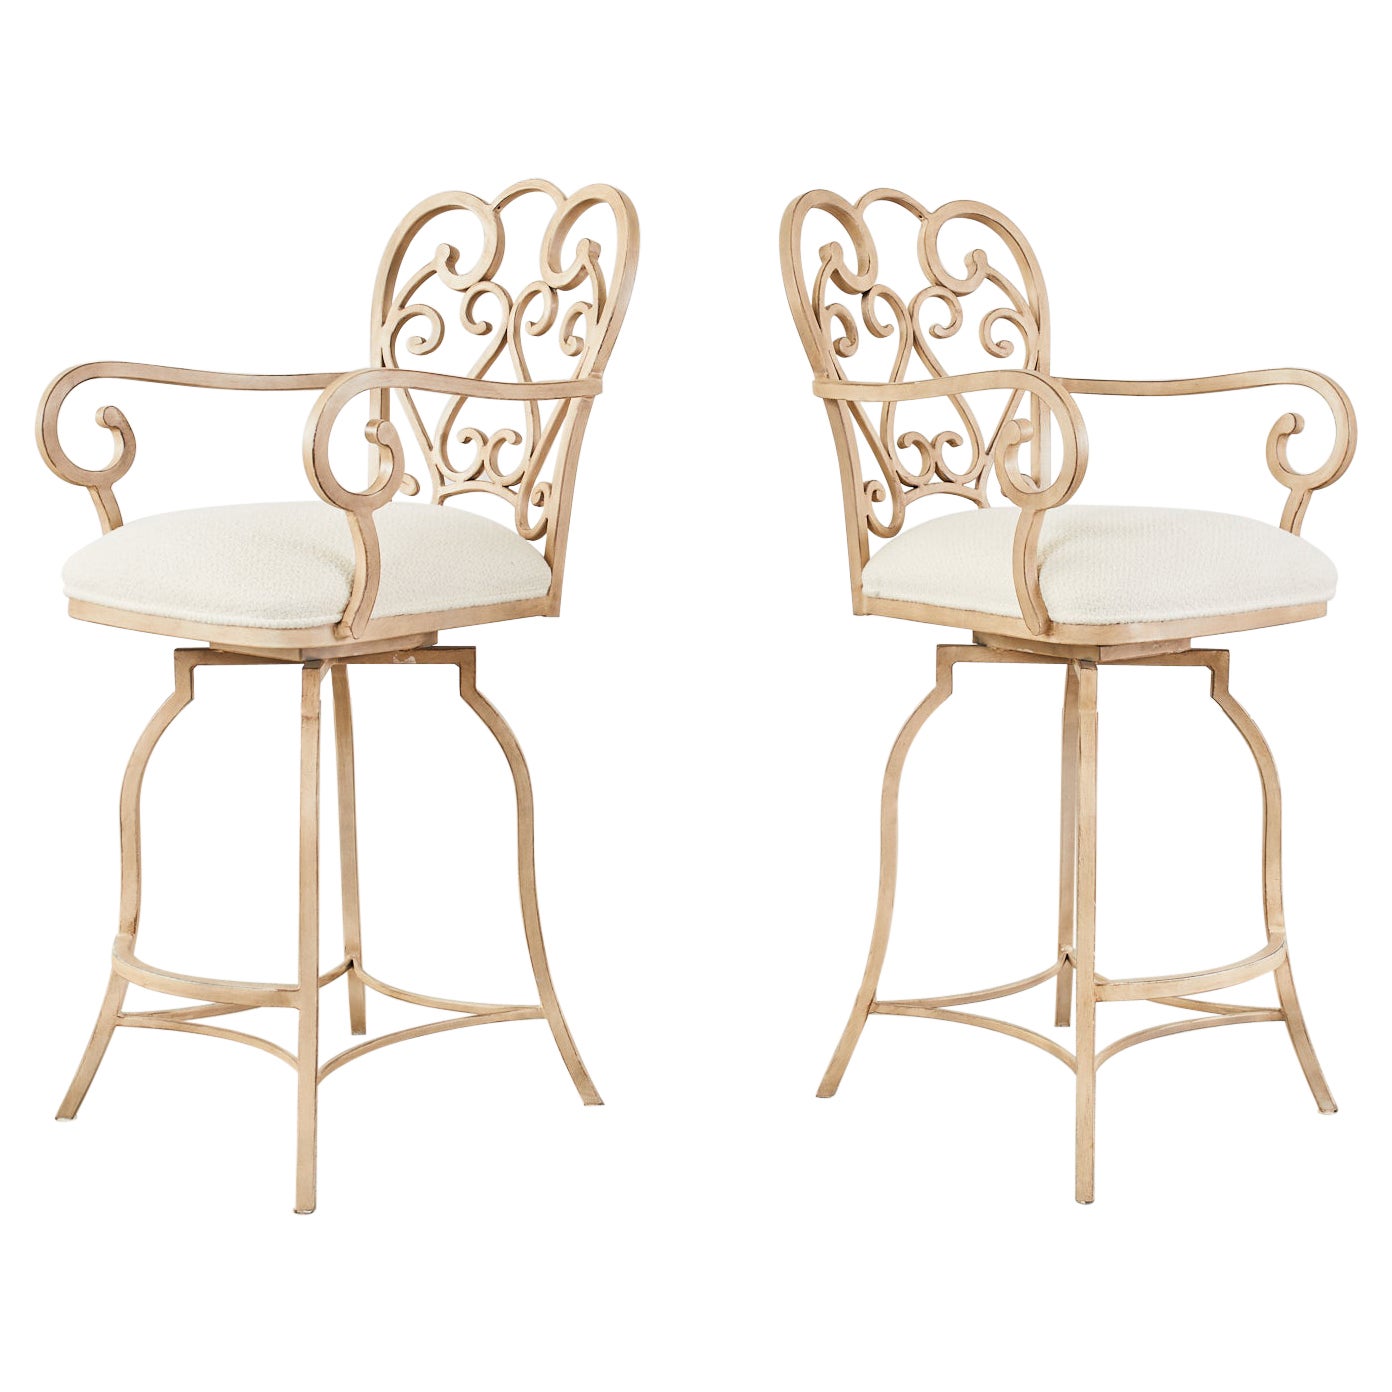 Pair of Spanish Colonial Style Painted Iron Garden Counter Bar Stools